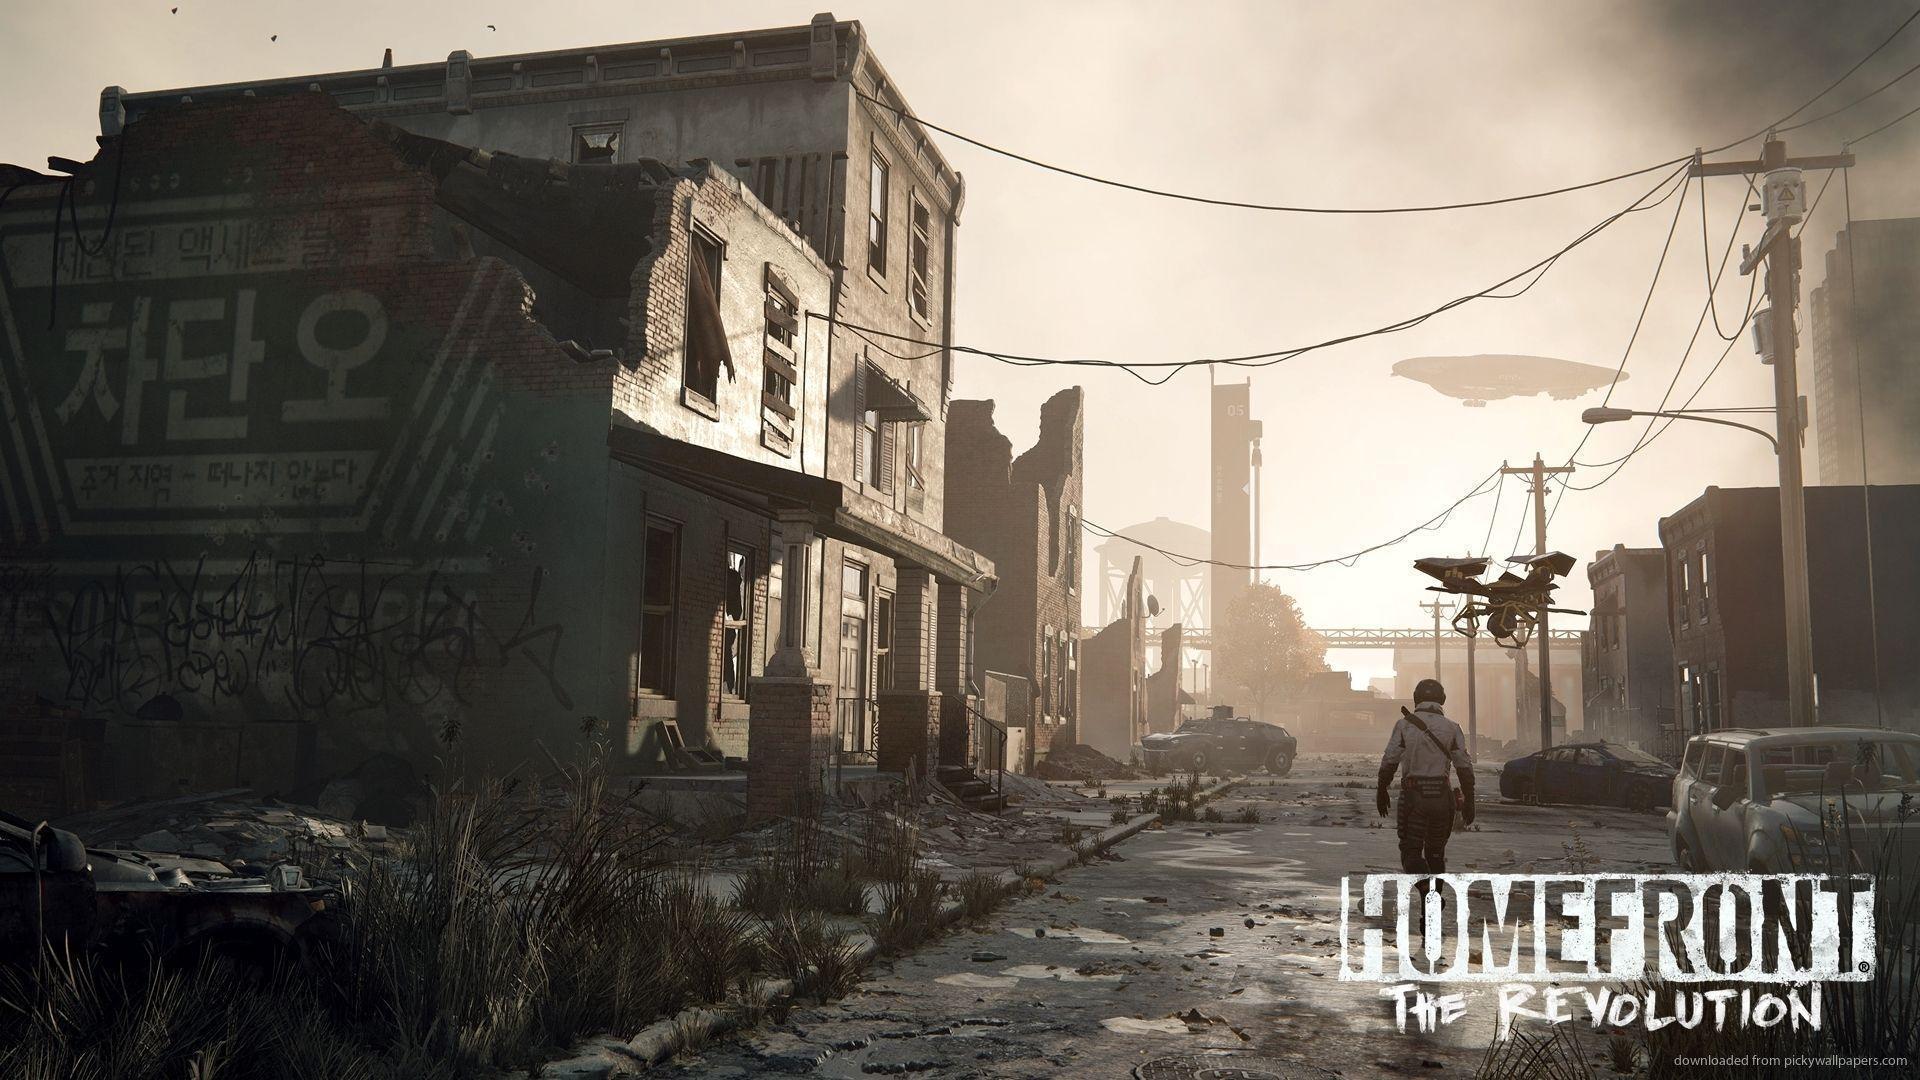 Normal (4:3) 2016 Homefront The Revolution Video Game Wallpaper